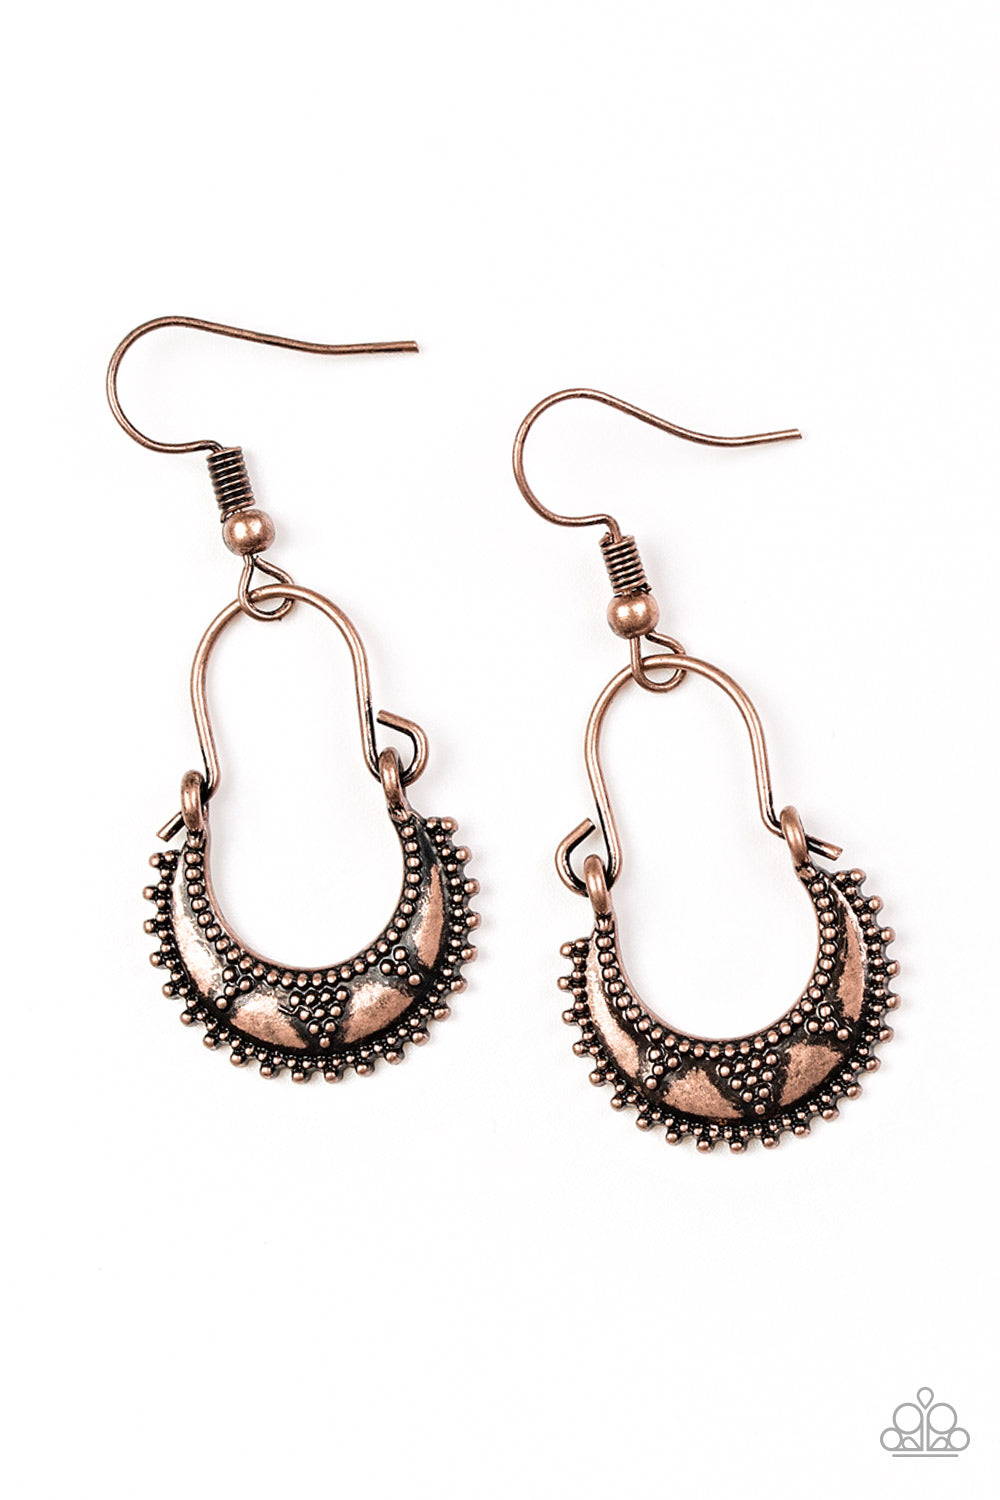 shop-sassy-affordable- industrially-indigenous-copper-paparazzi-accessories